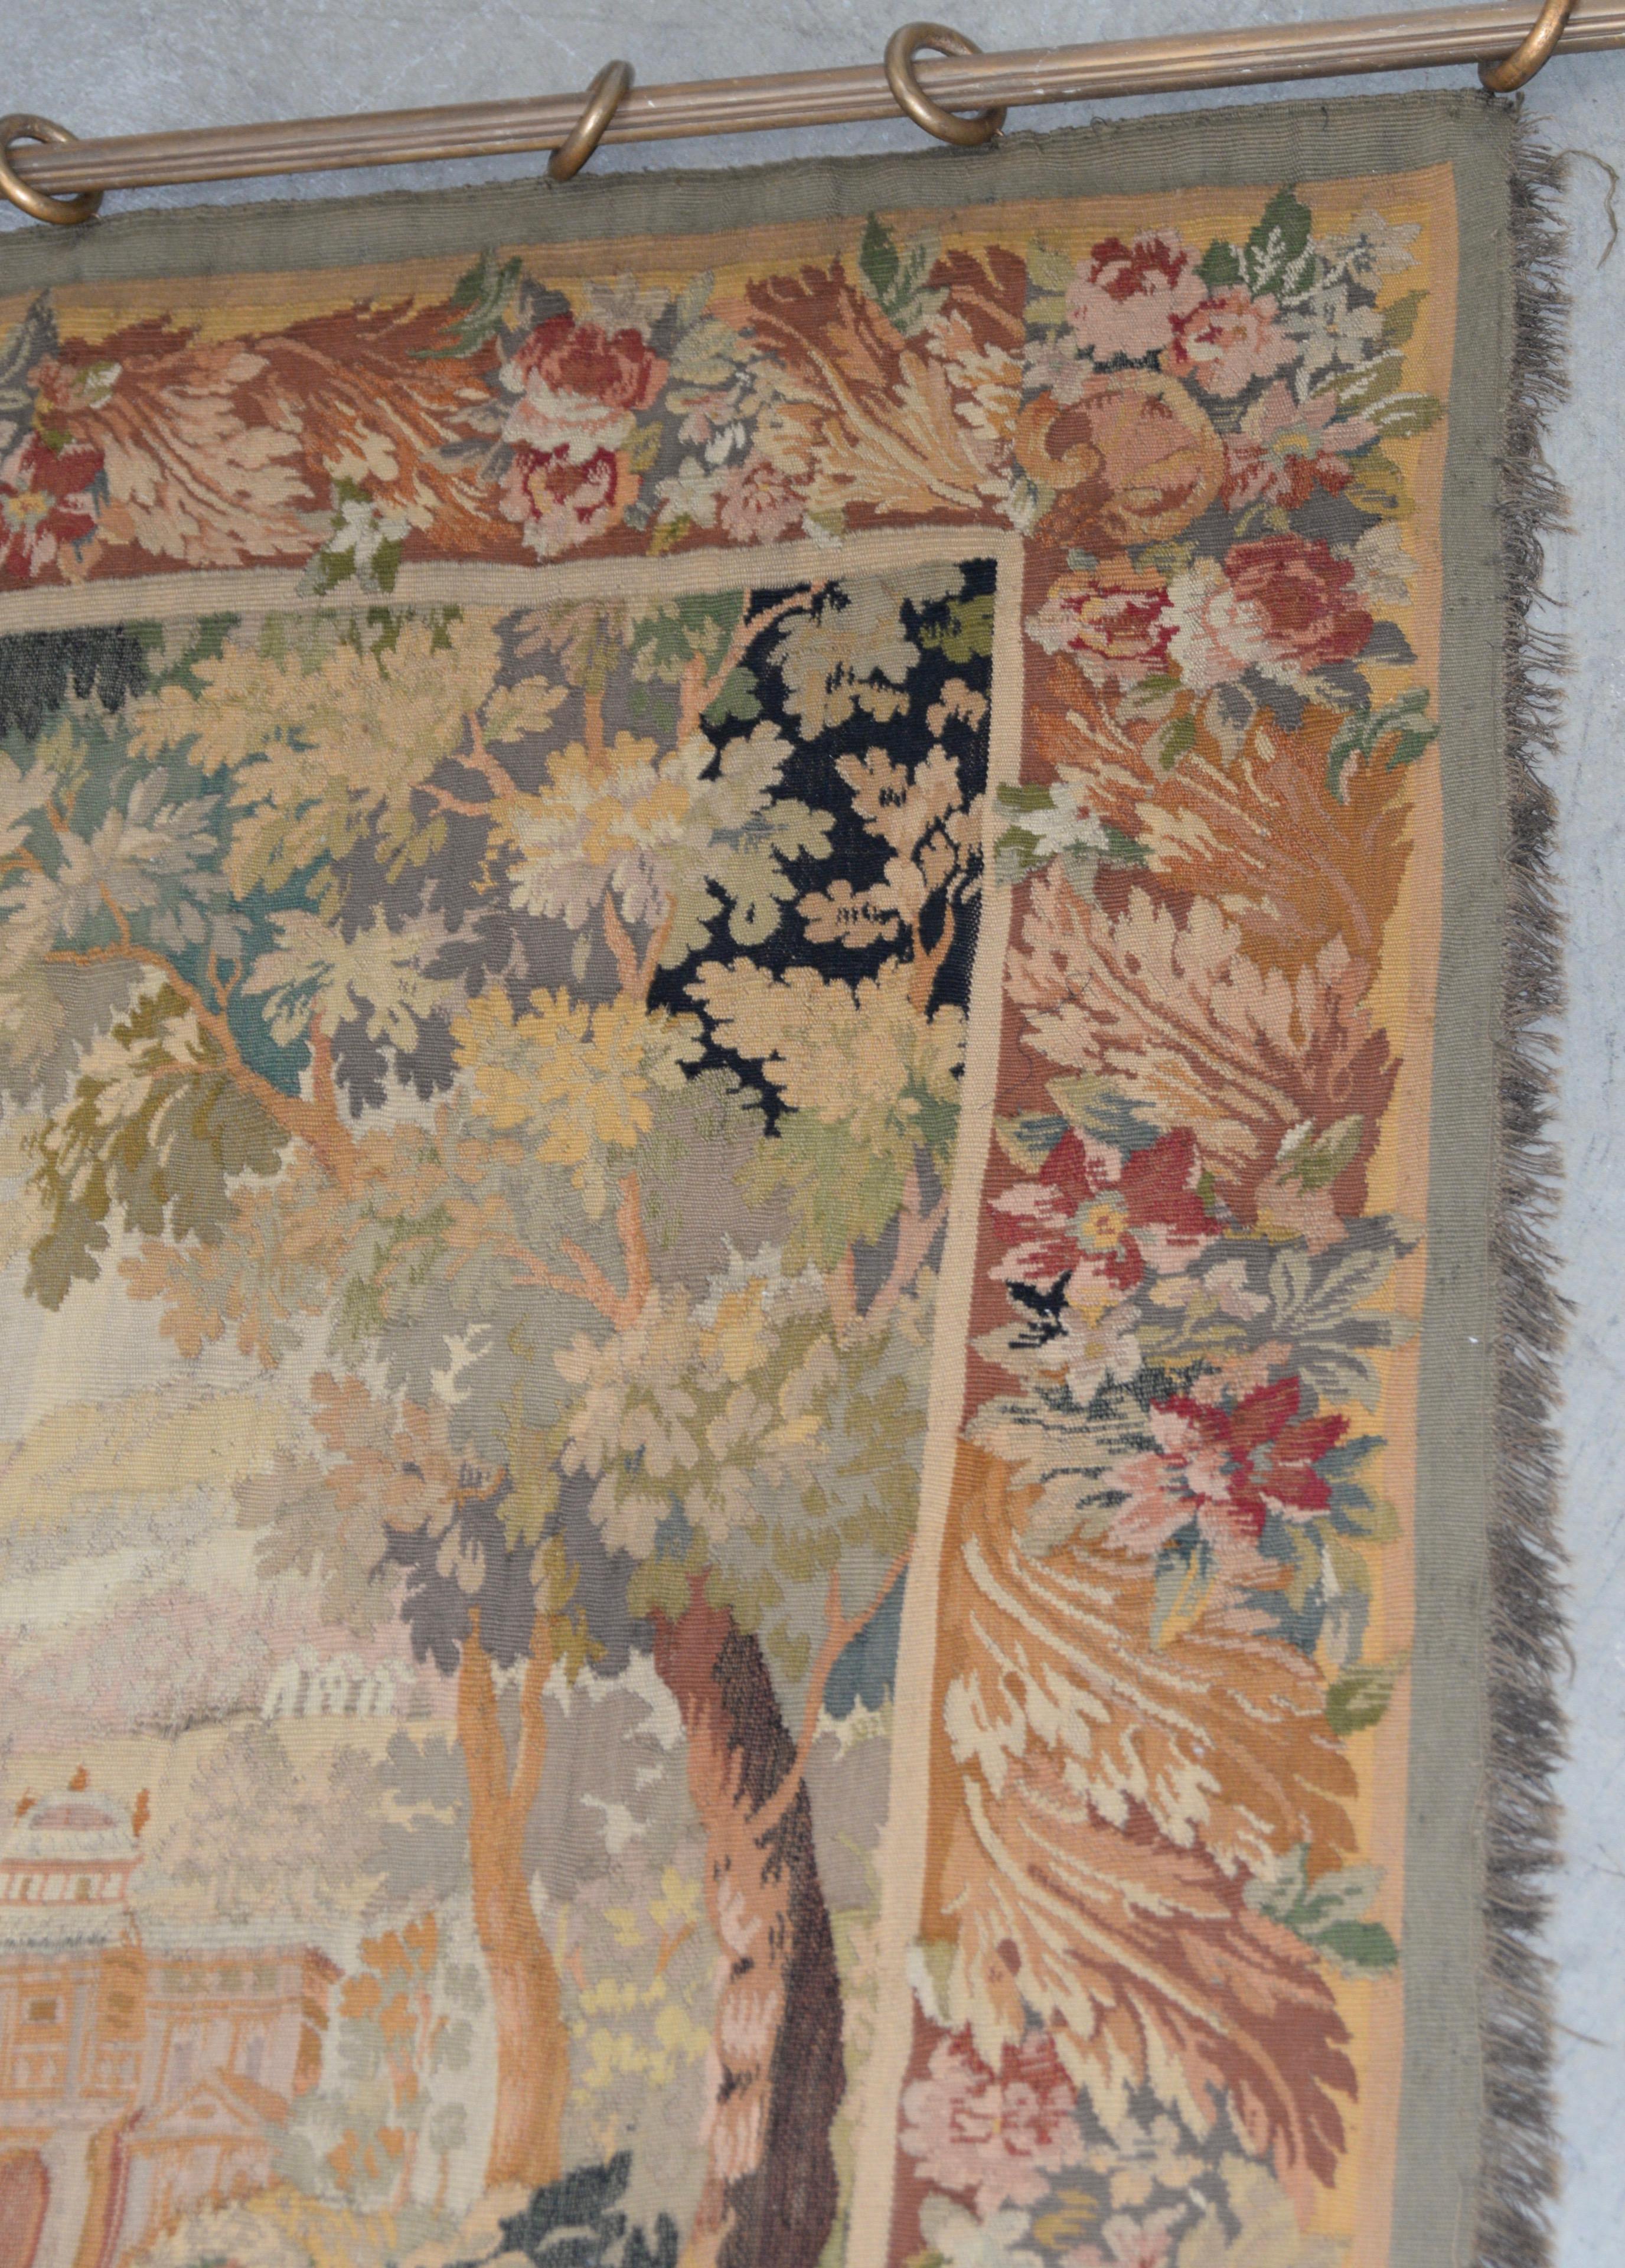 Textile Fine Antique European Tapestry Depicting a Country Scene with Dogs